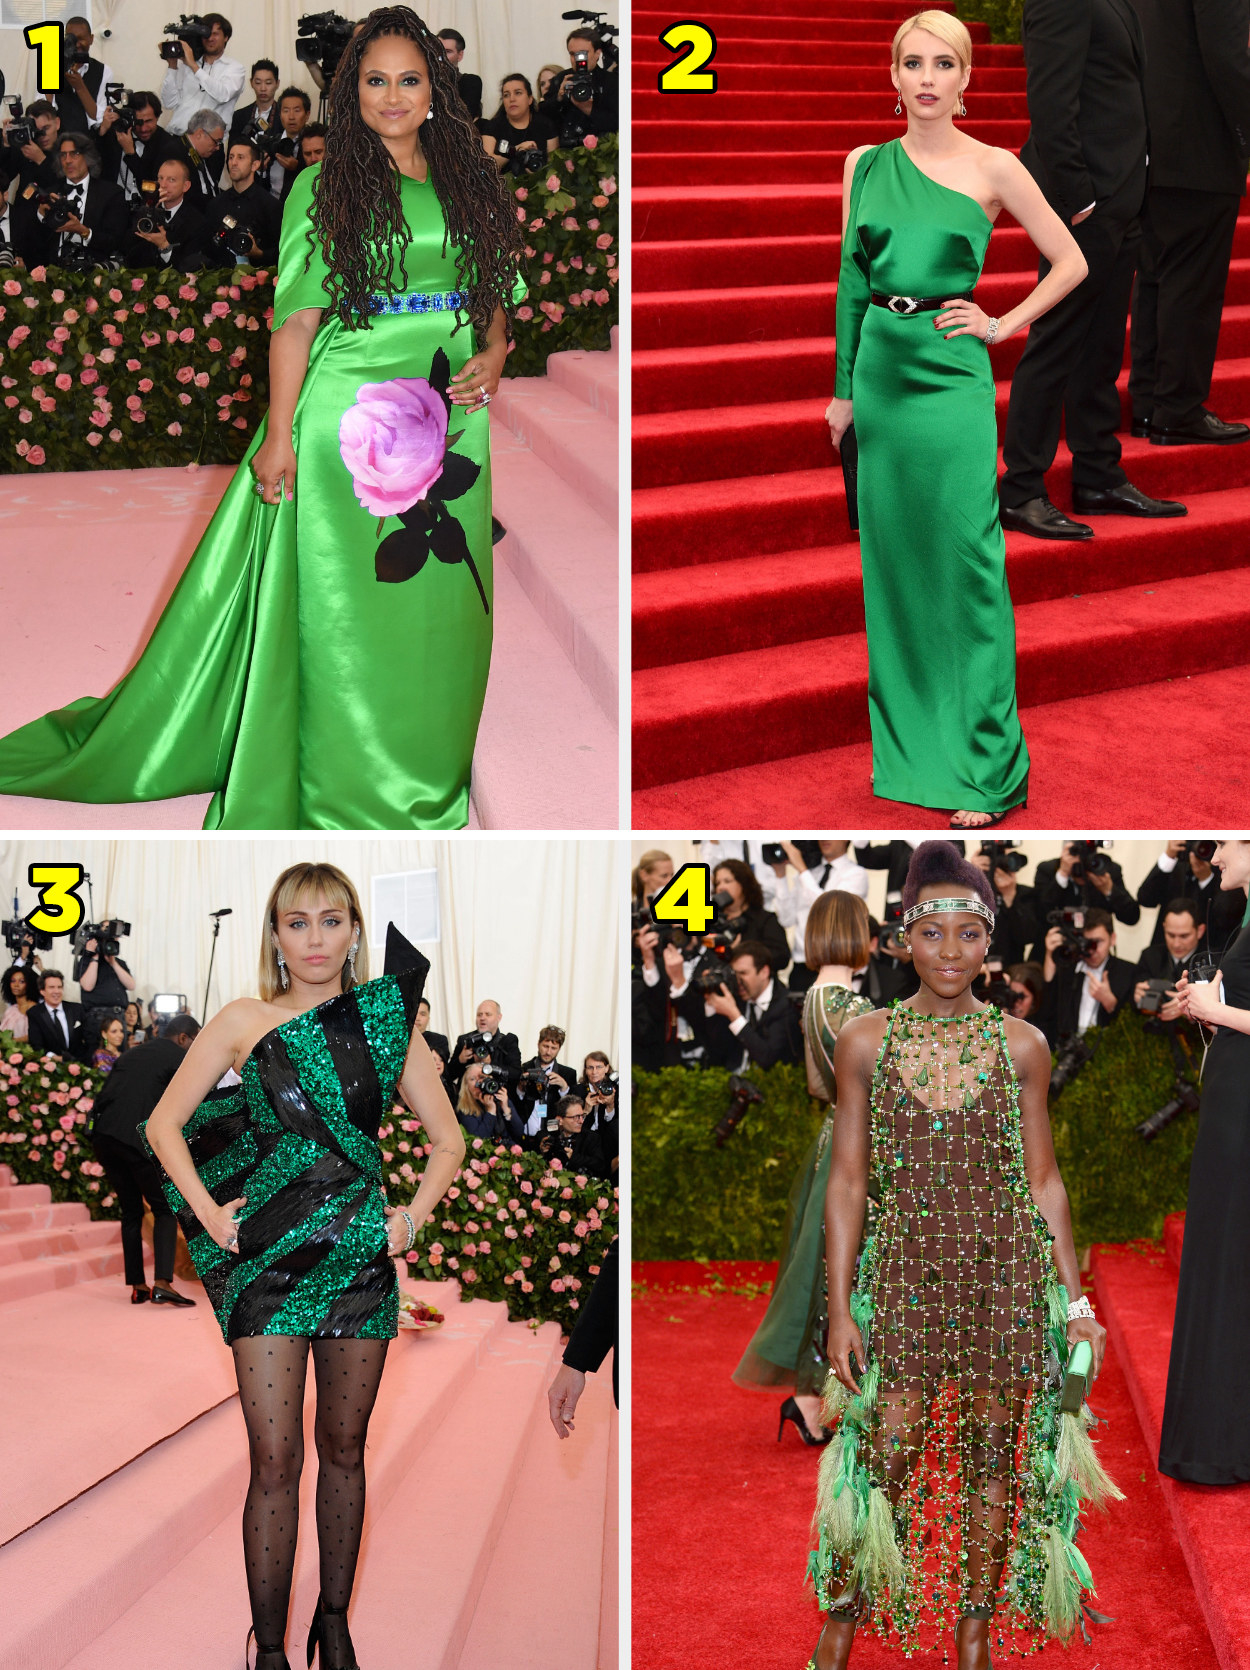 1. A shortsleeved dress belted at the waist with a giant flower printed on the front. 2. A one shoulder gown with a belt at the waist. 2. Asymmetrical minidress with sequins and stripes. 4. A short dress with a flapper-style metal overlay.